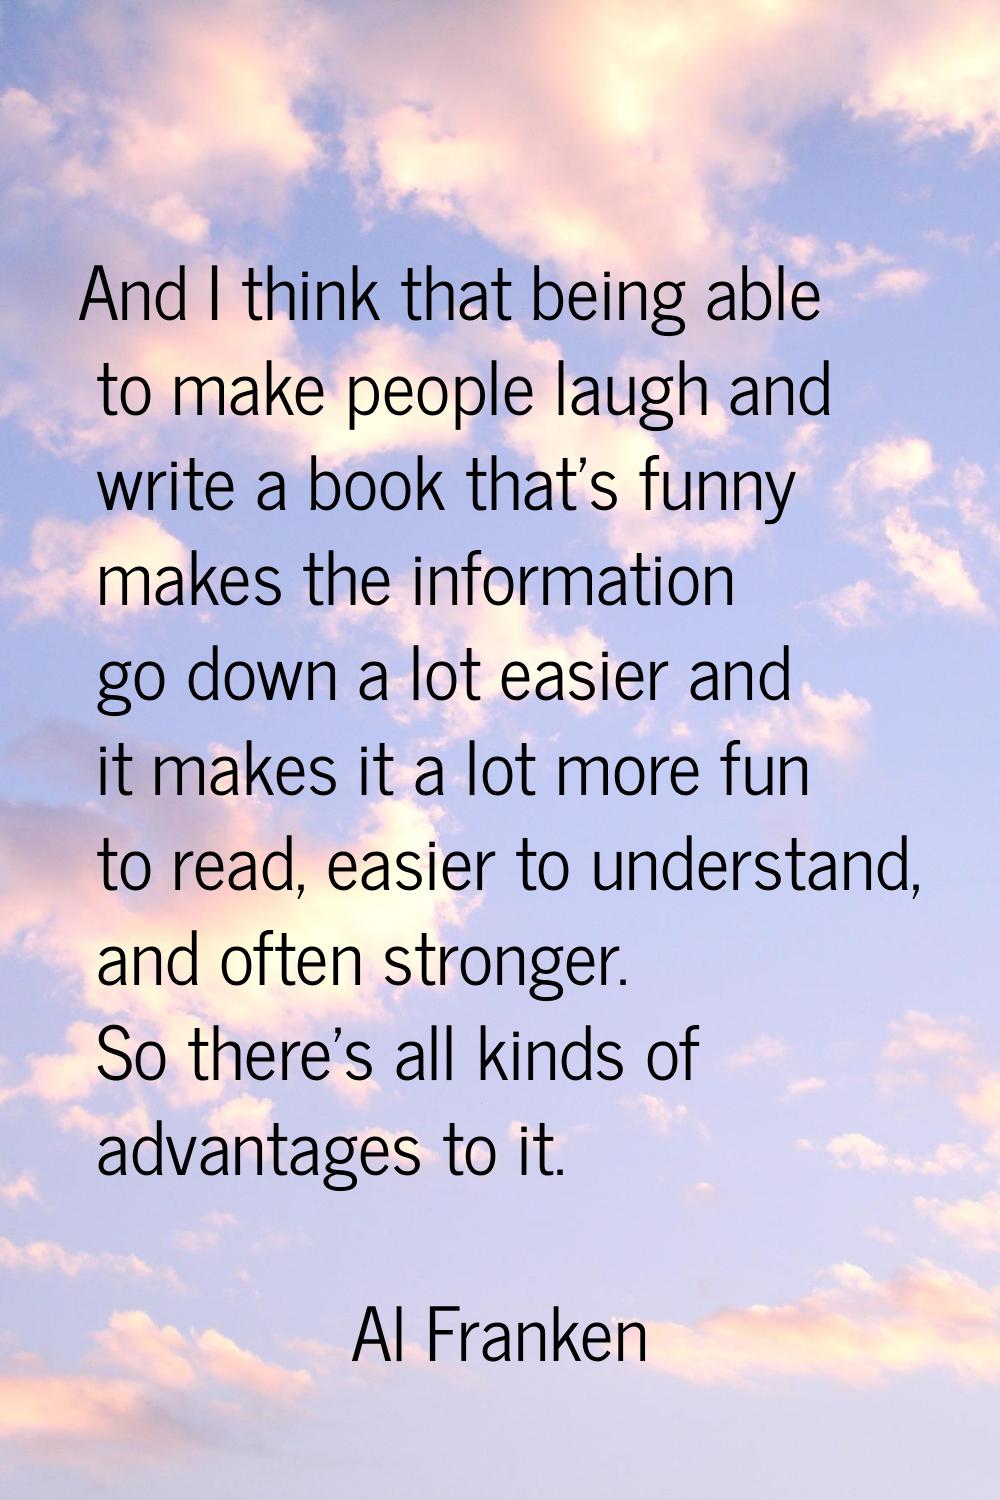 And I think that being able to make people laugh and write a book that's funny makes the informatio